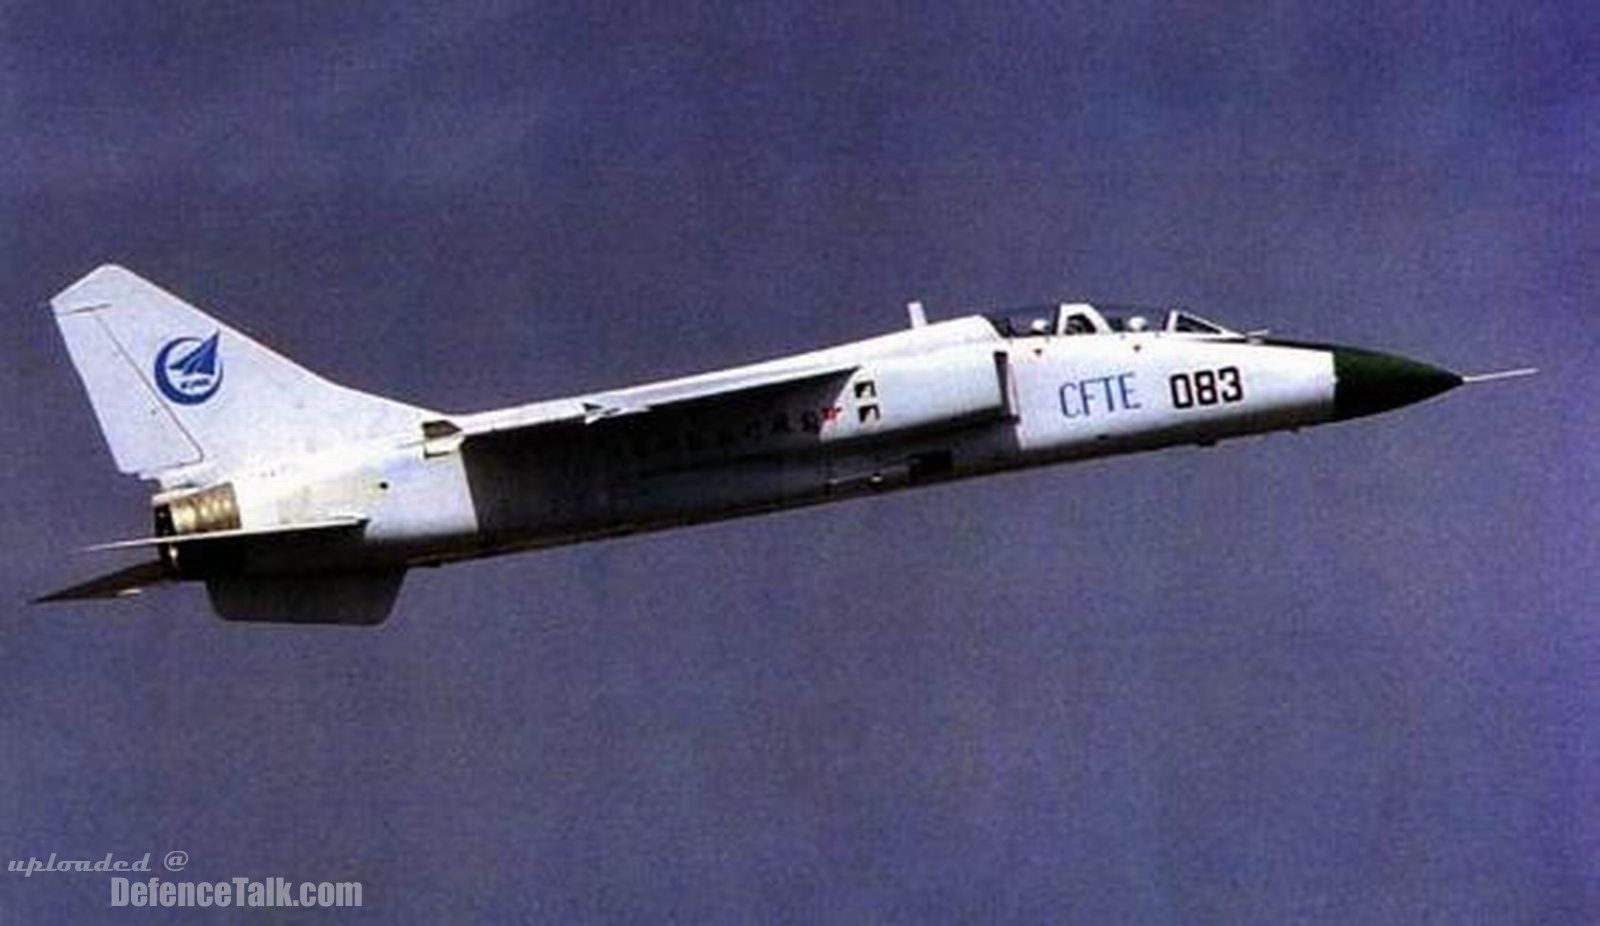 JH-7 - People's Liberation Army Air Force